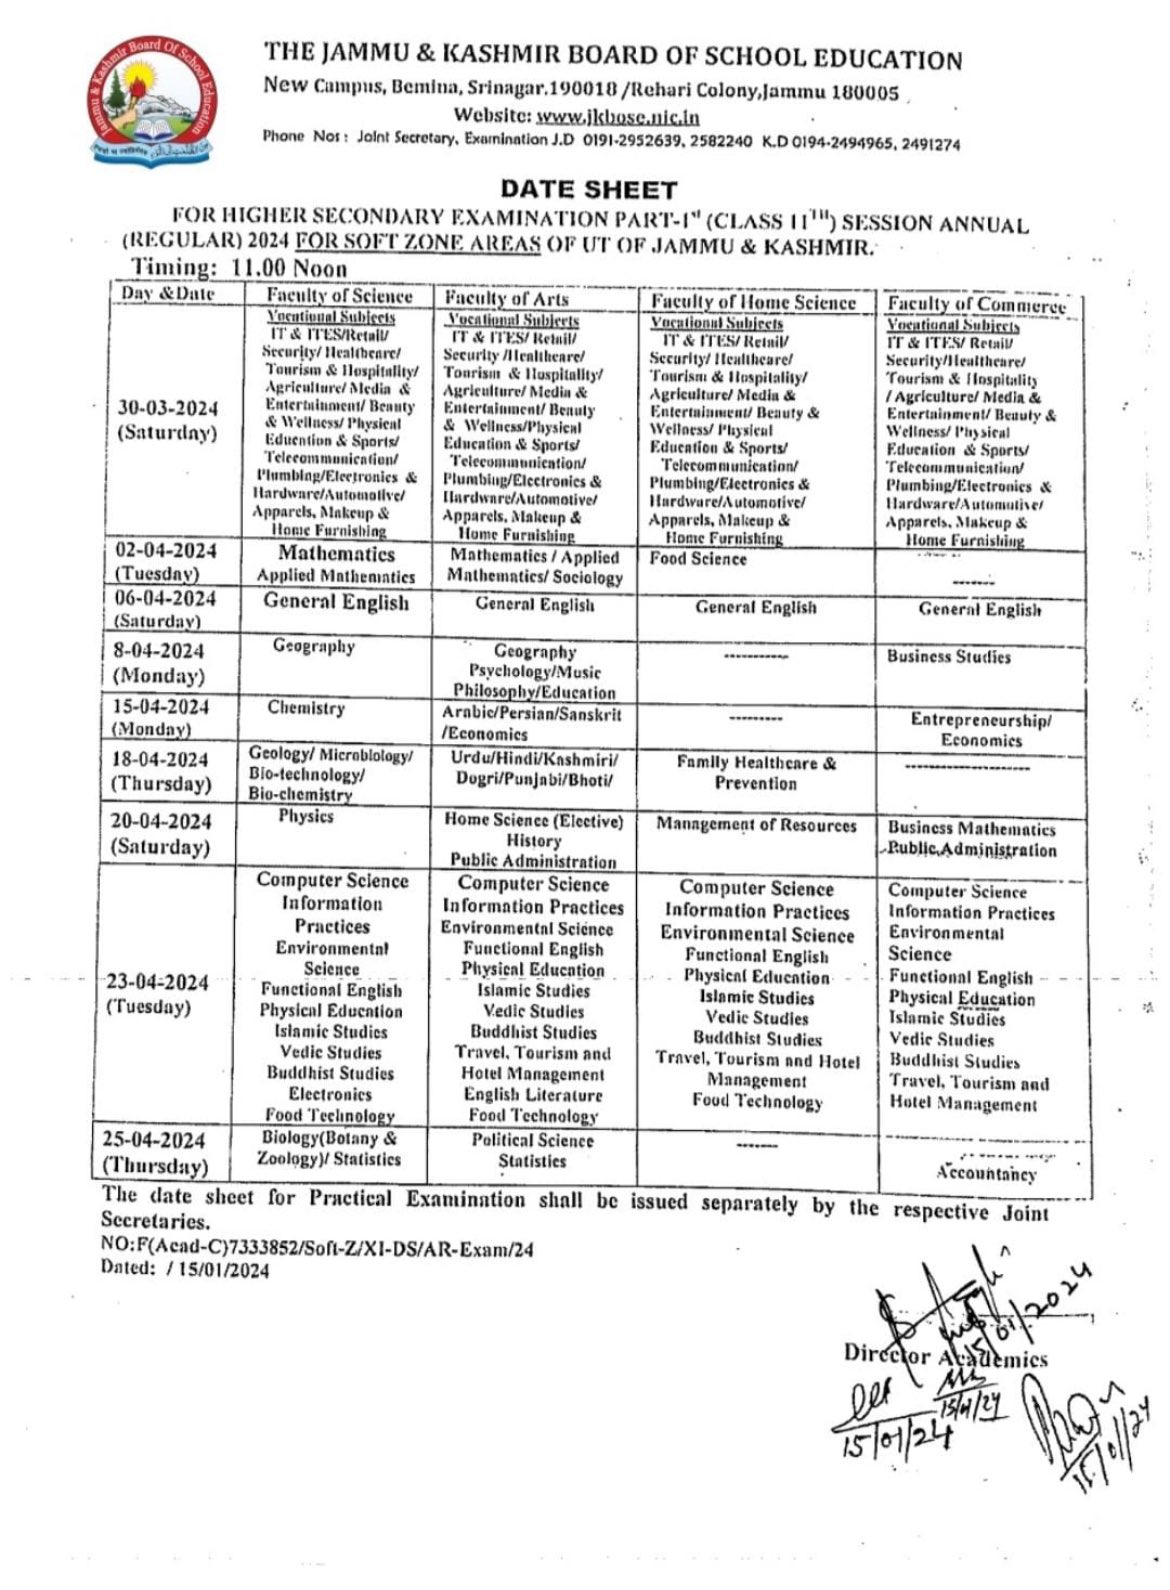 JKBOSE Class 11th Date Sheet Released Download Now.